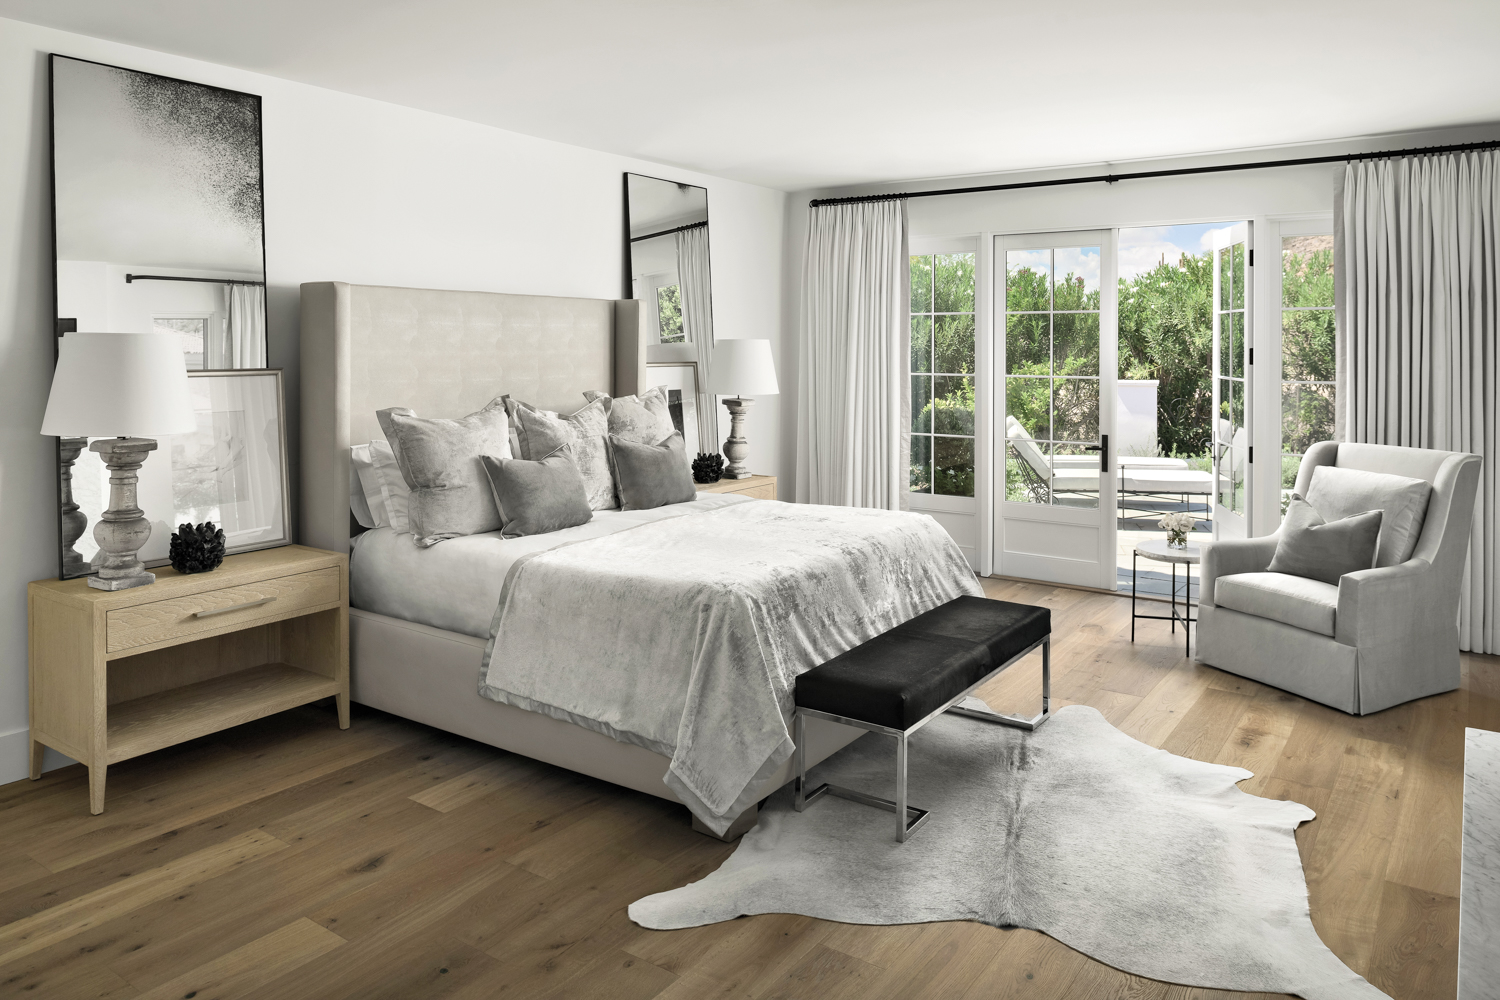 A white bedroom with gray furniture, silvery bedding and animal skin throw rug.